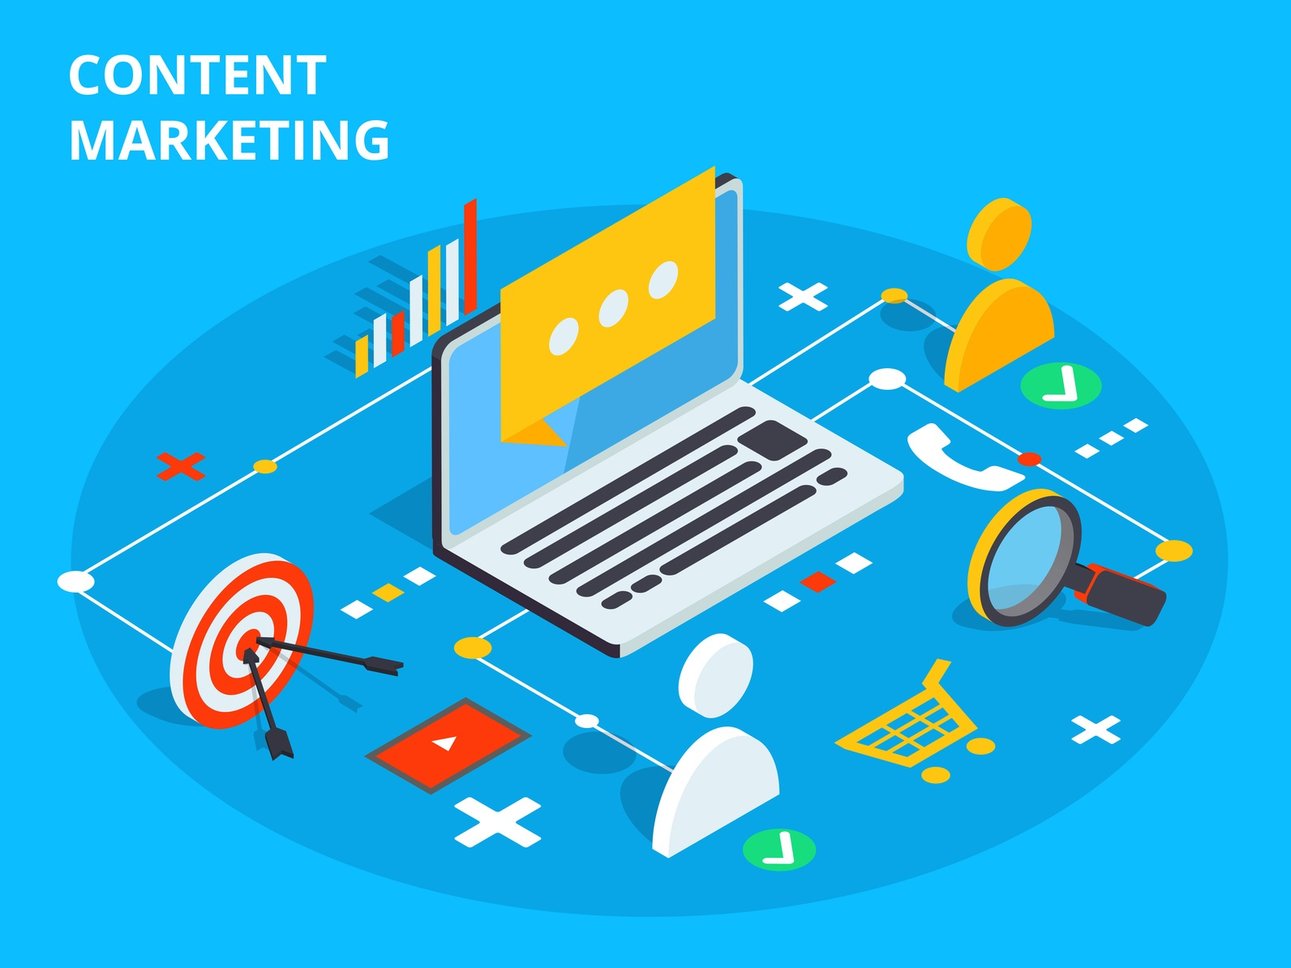 Content Marketing Tips From Your Customers (infographic)